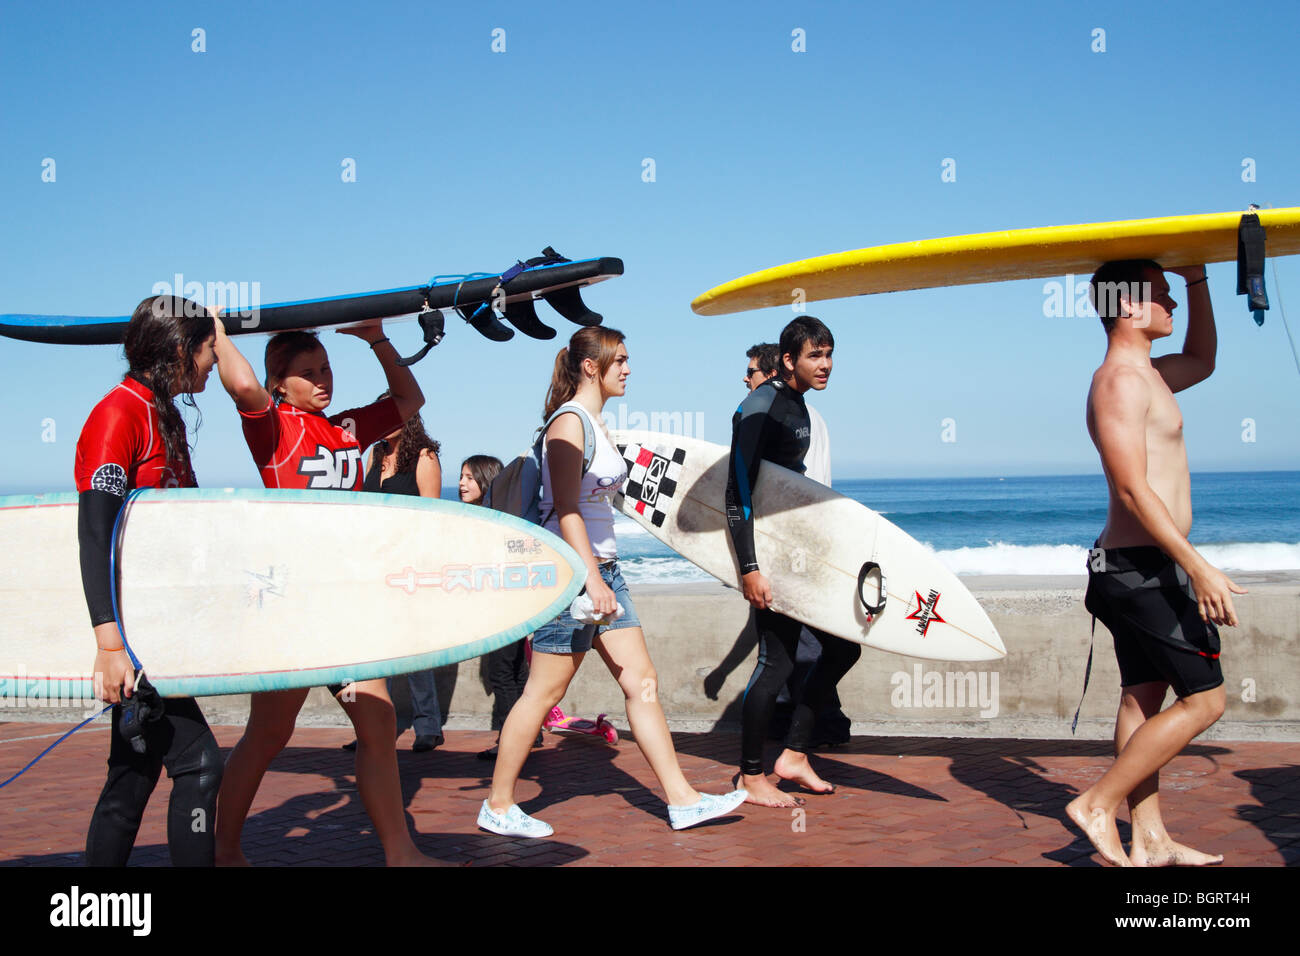 Spanish teenagers carrying surfboards at start of surf lesson Stock Photo